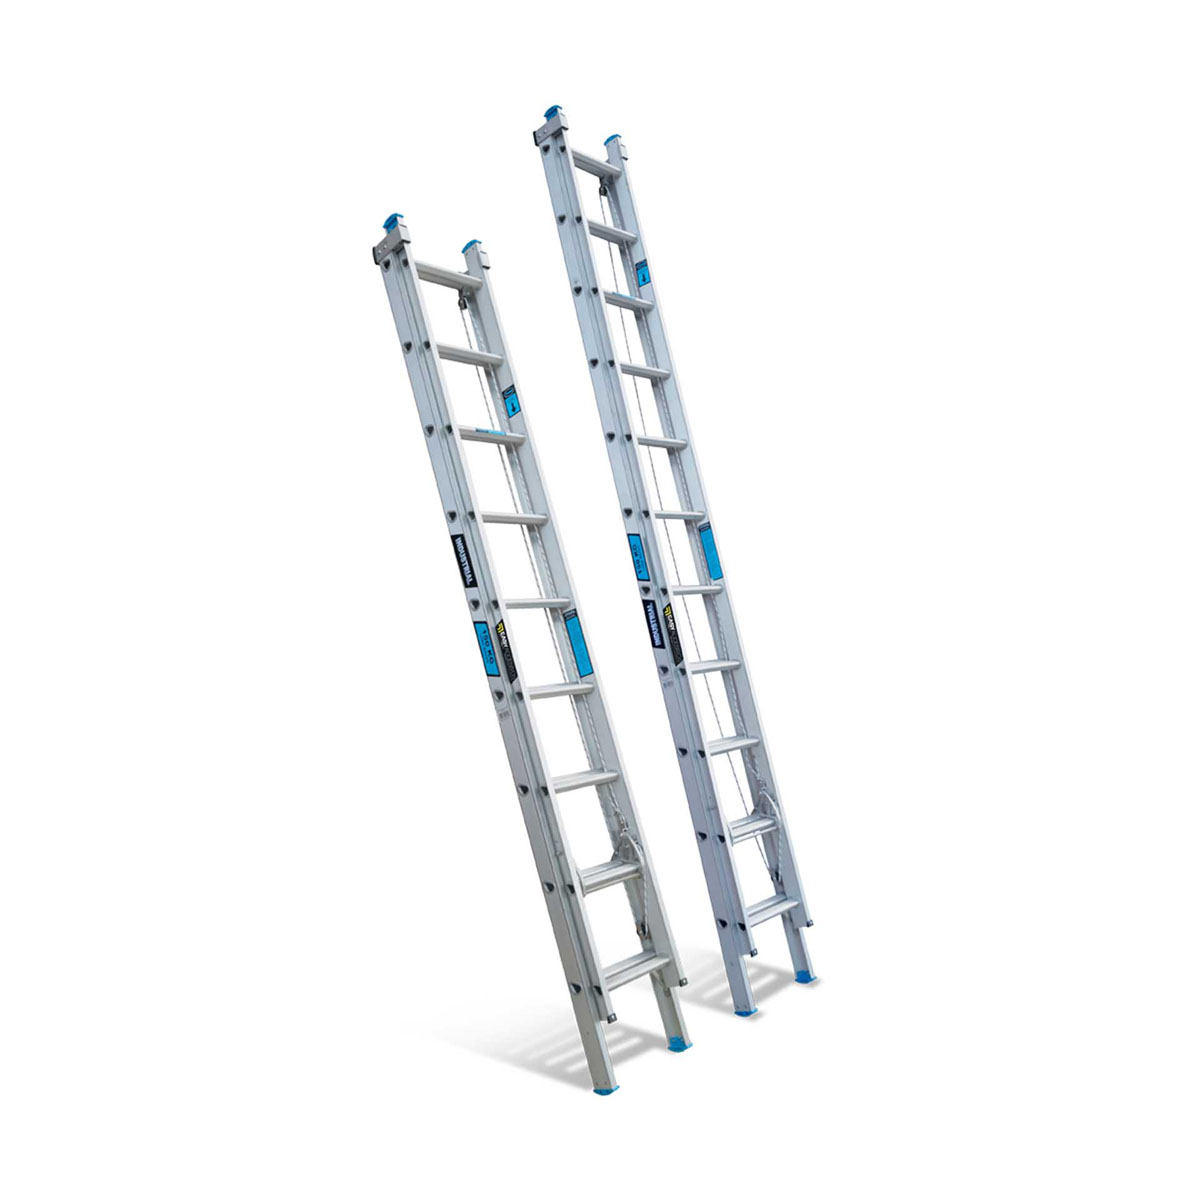 Buy Extension Ladders - Aluminium available at Astrolift NZ